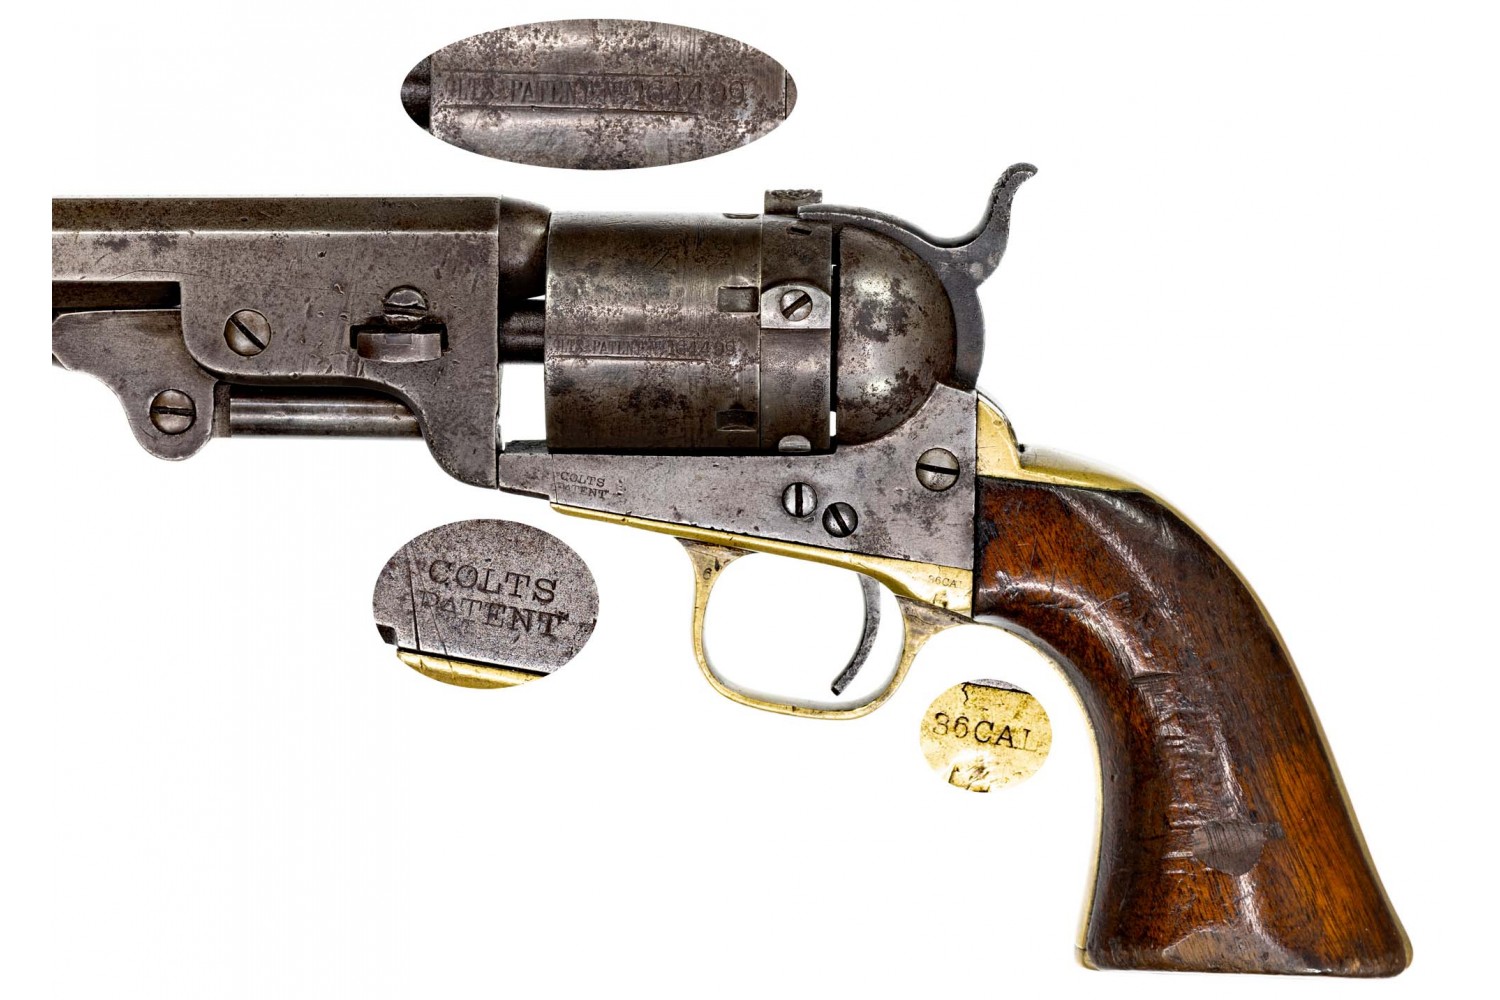 Union officer carries a pair of revolvers including a Model 1851 tintype C623RP 